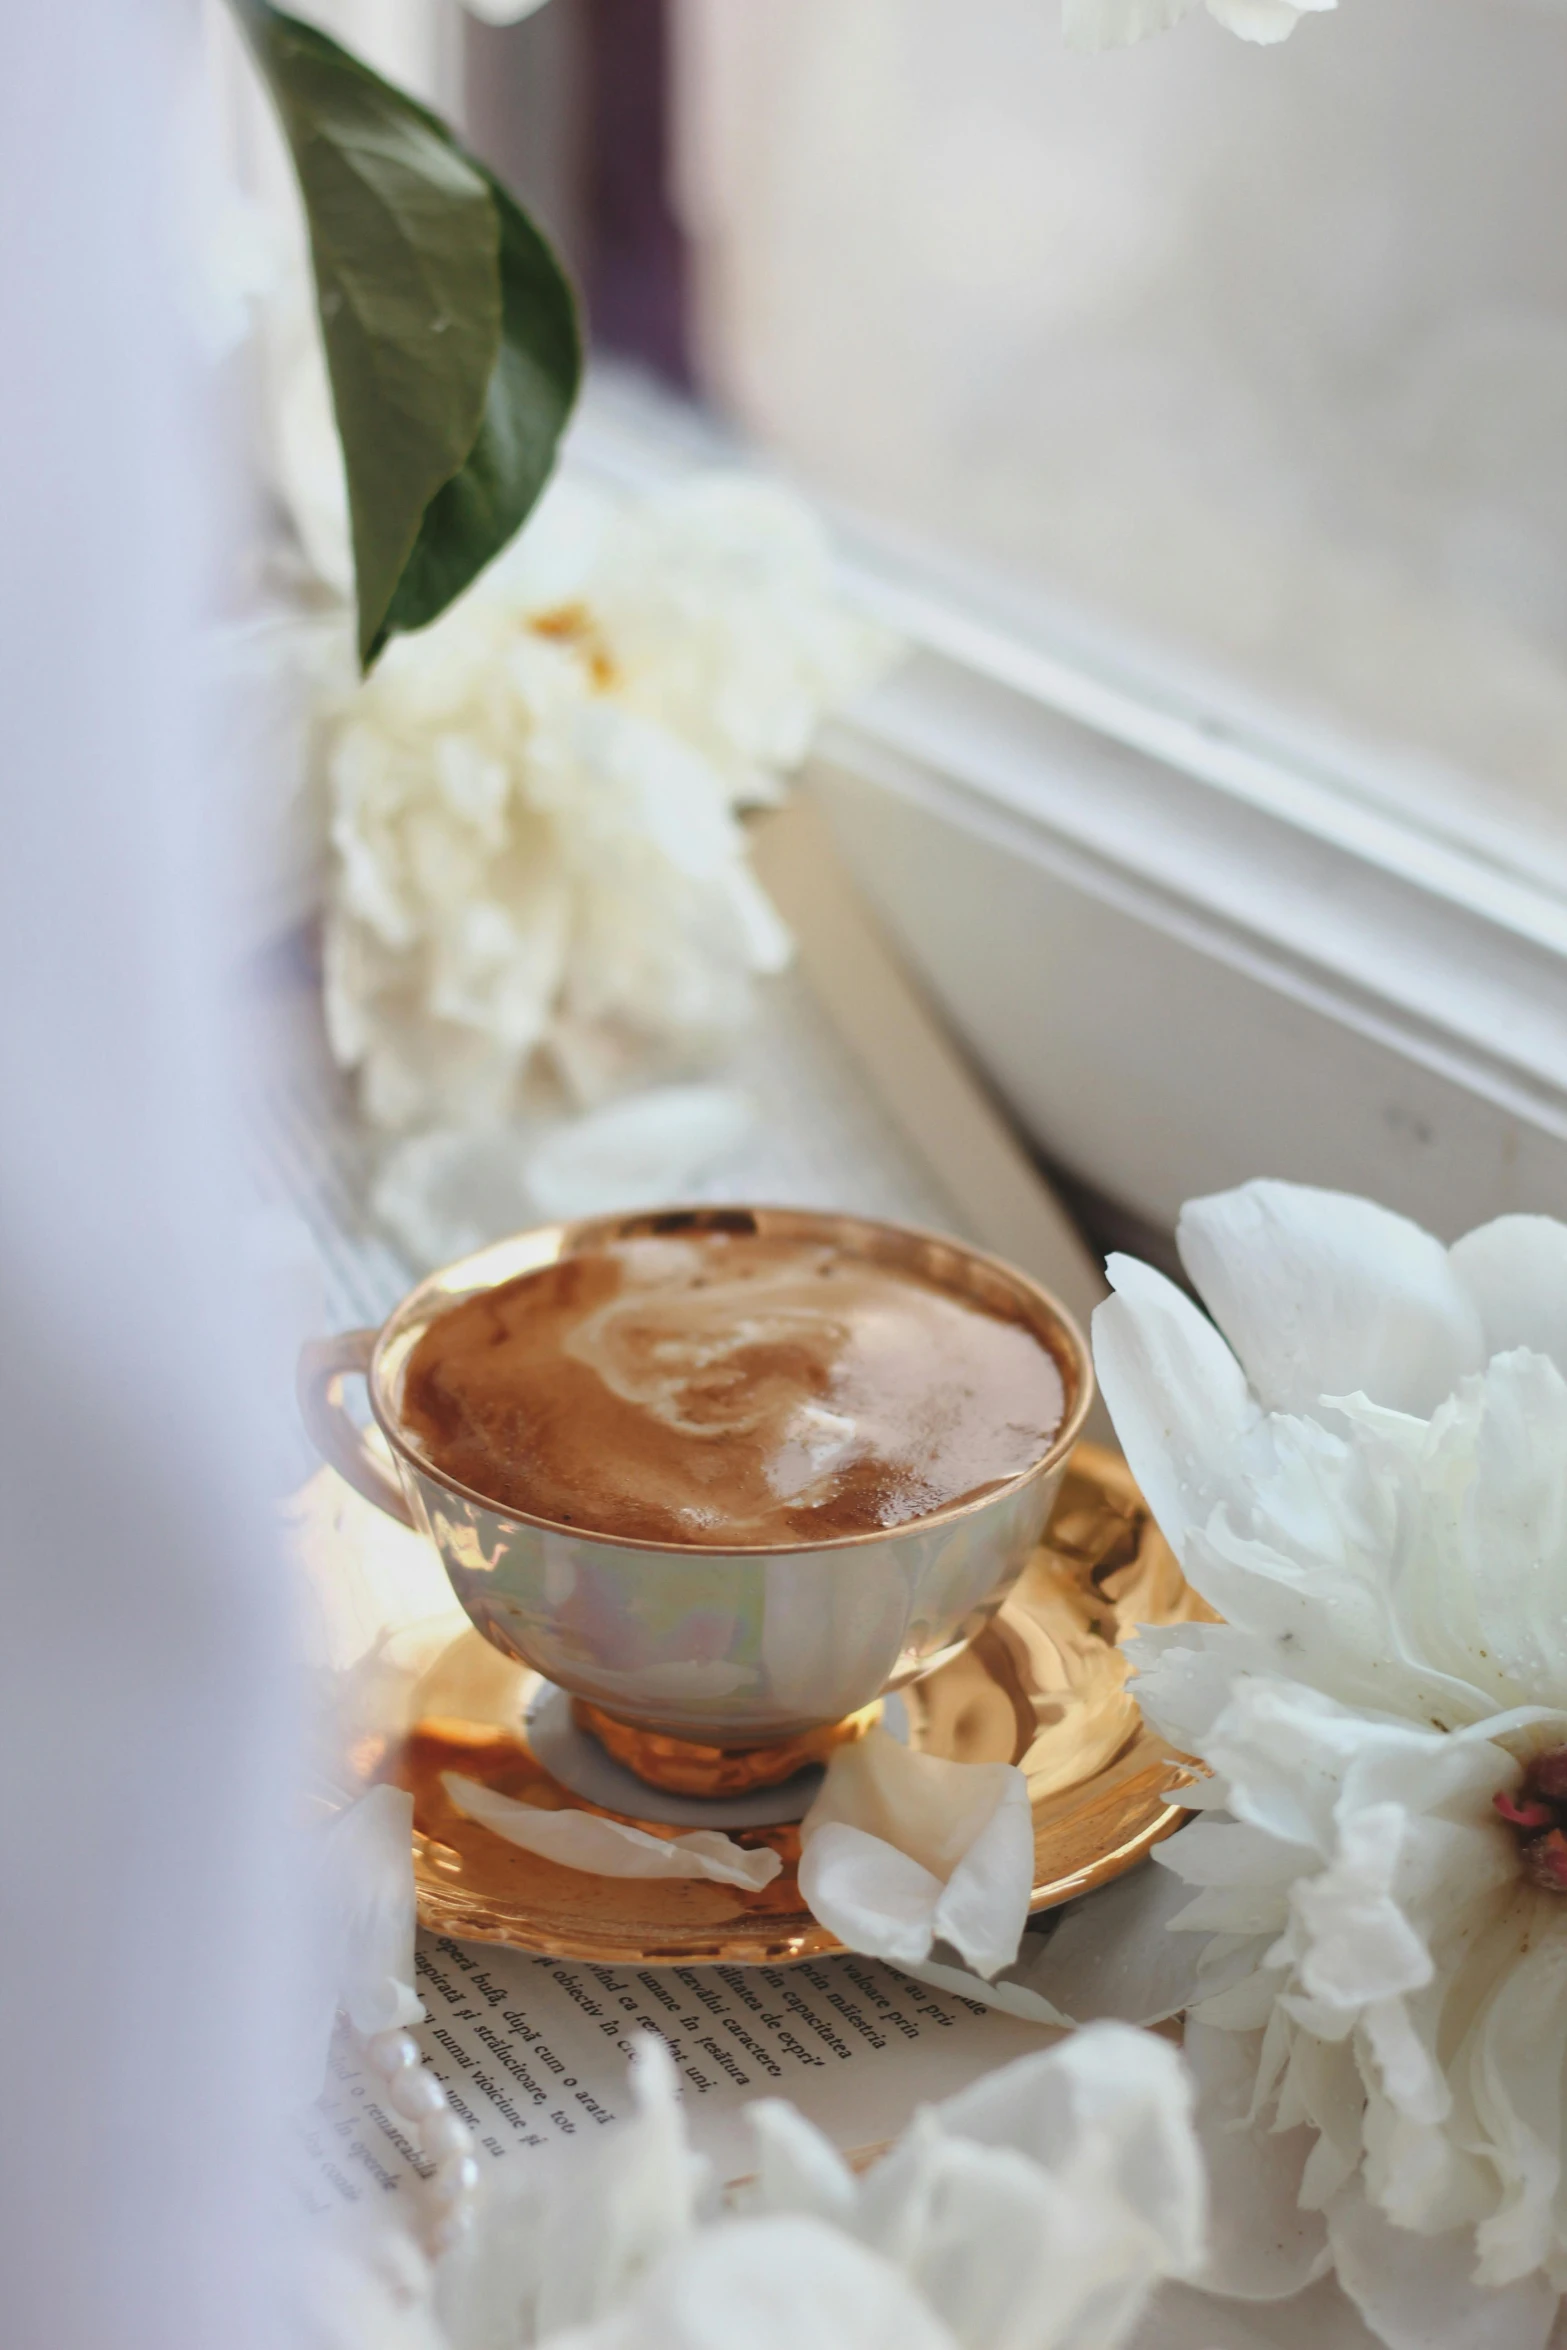 a white flower sits on a golden saucer